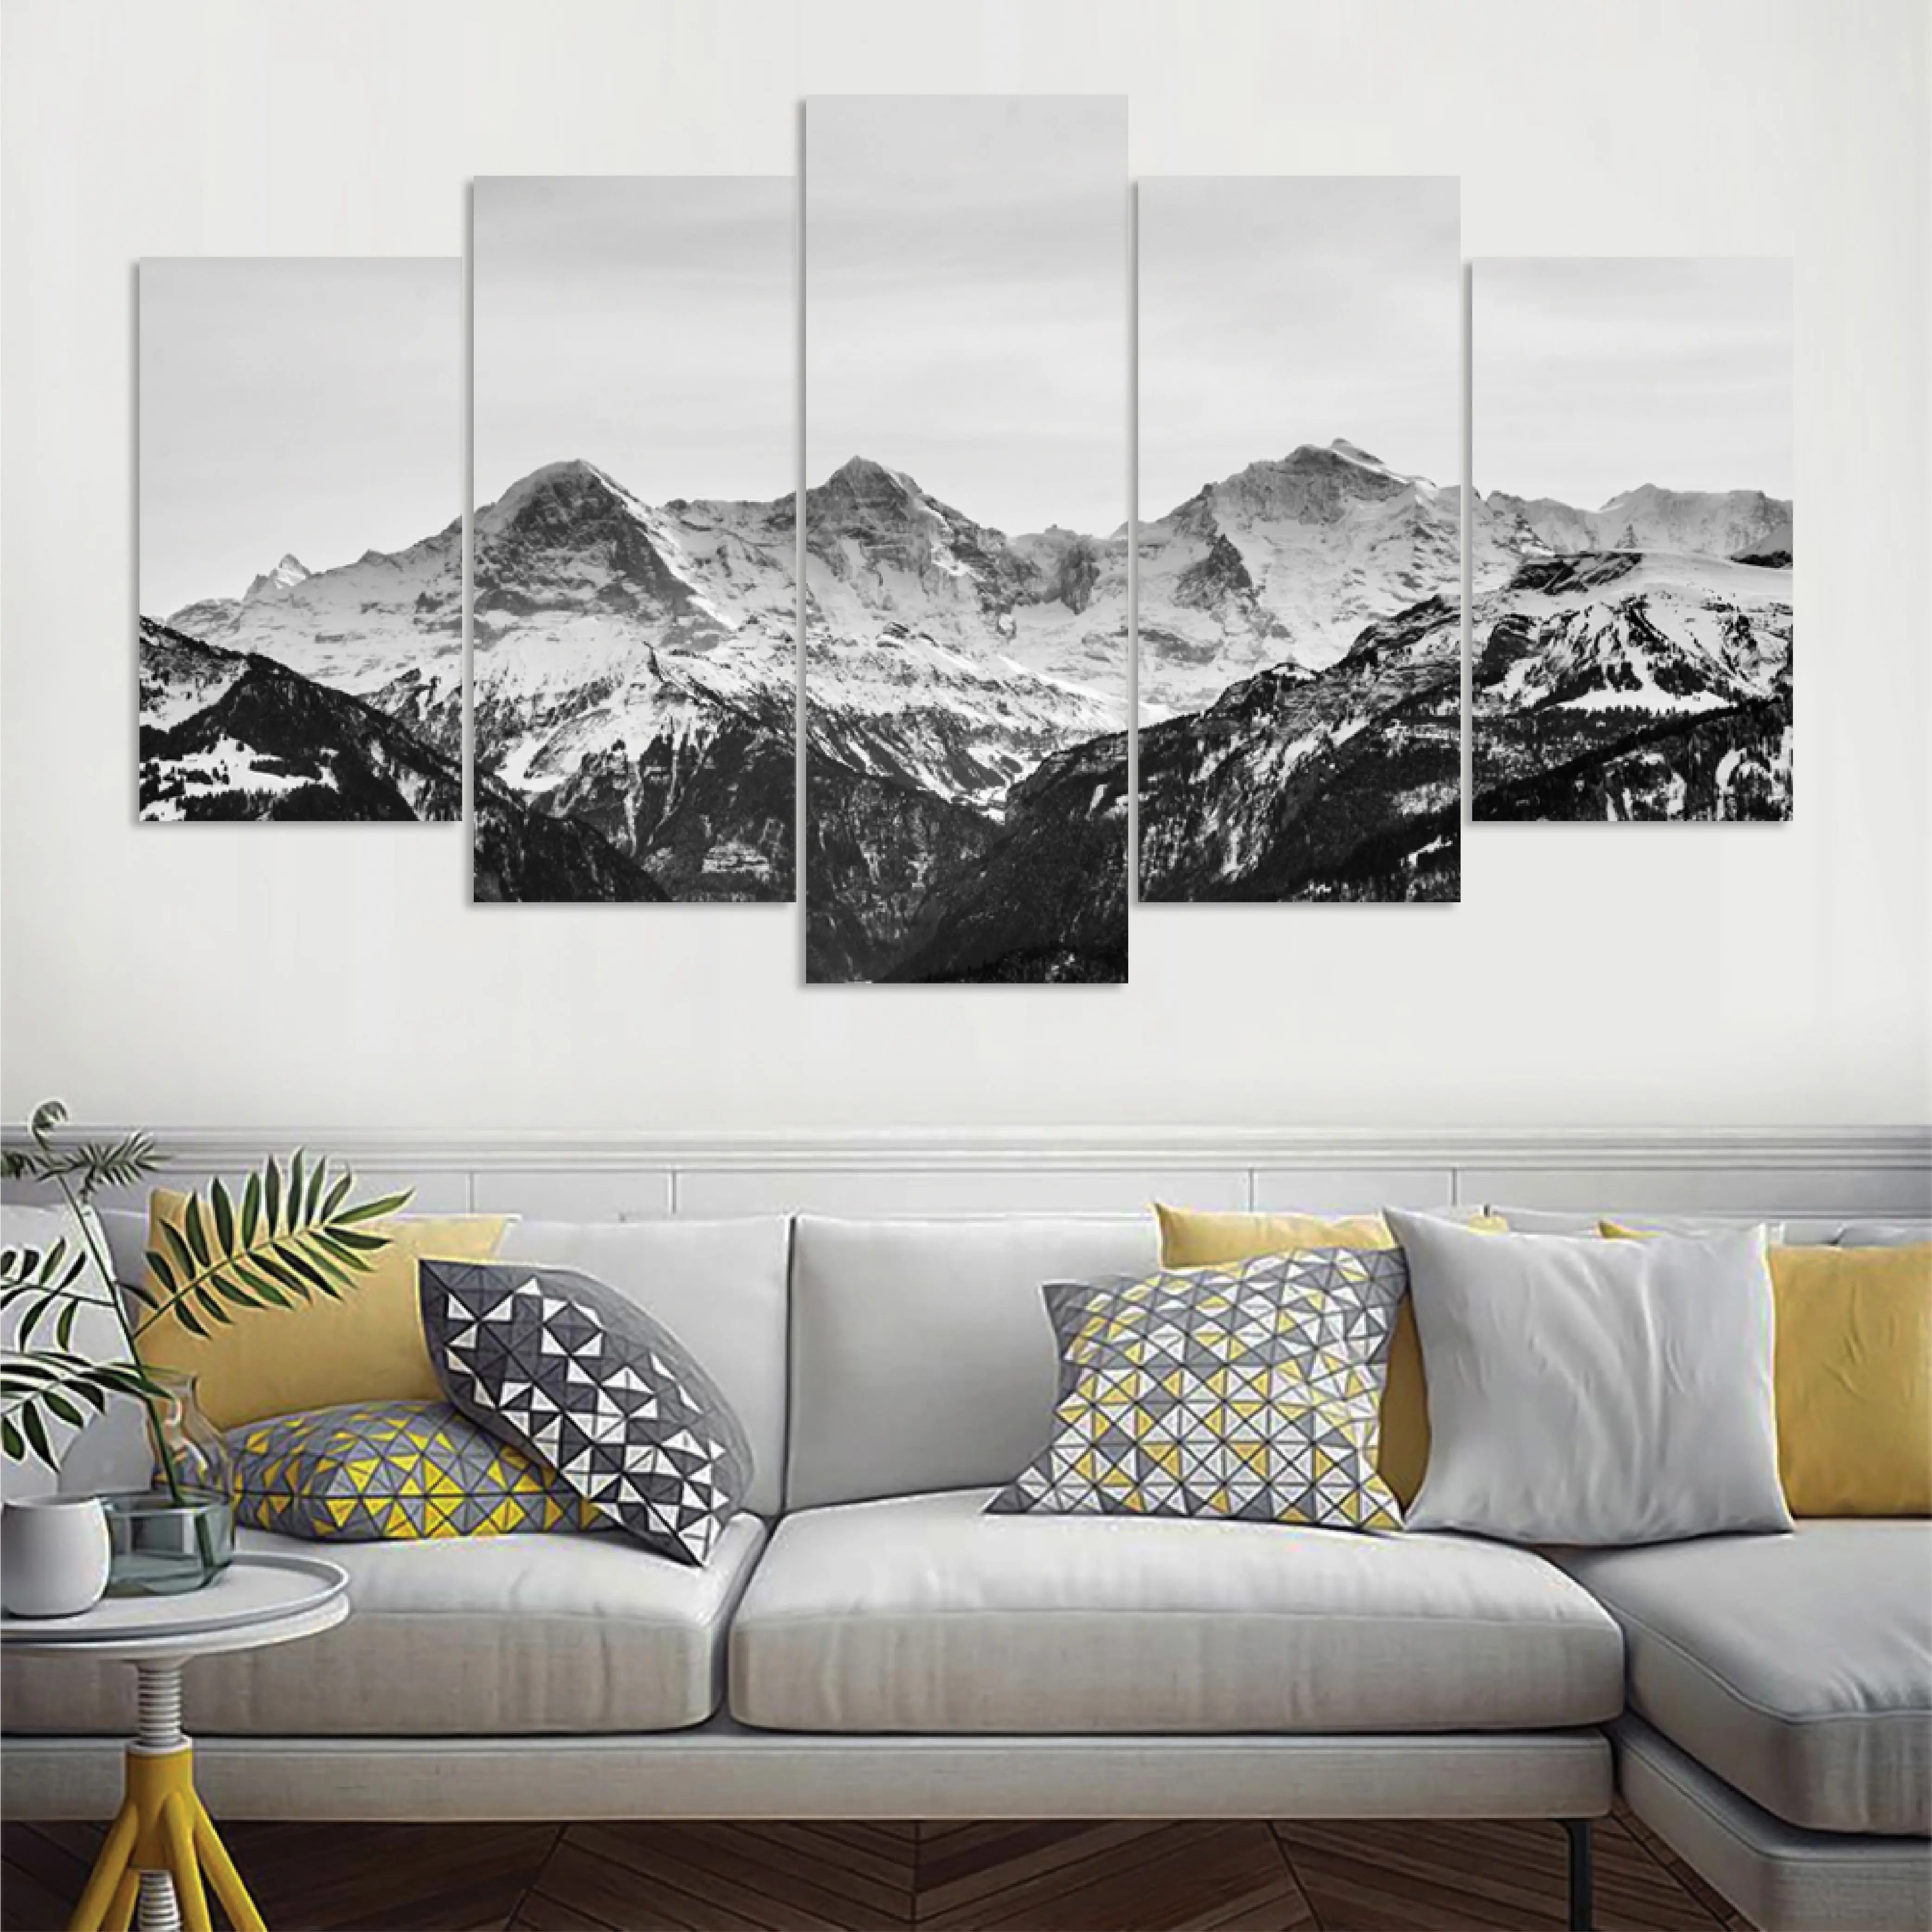 5 Panels Wall Art Canvas Painting Mountain Peak Posters and Prints Modern LANDSCAPE Paintings Decoration